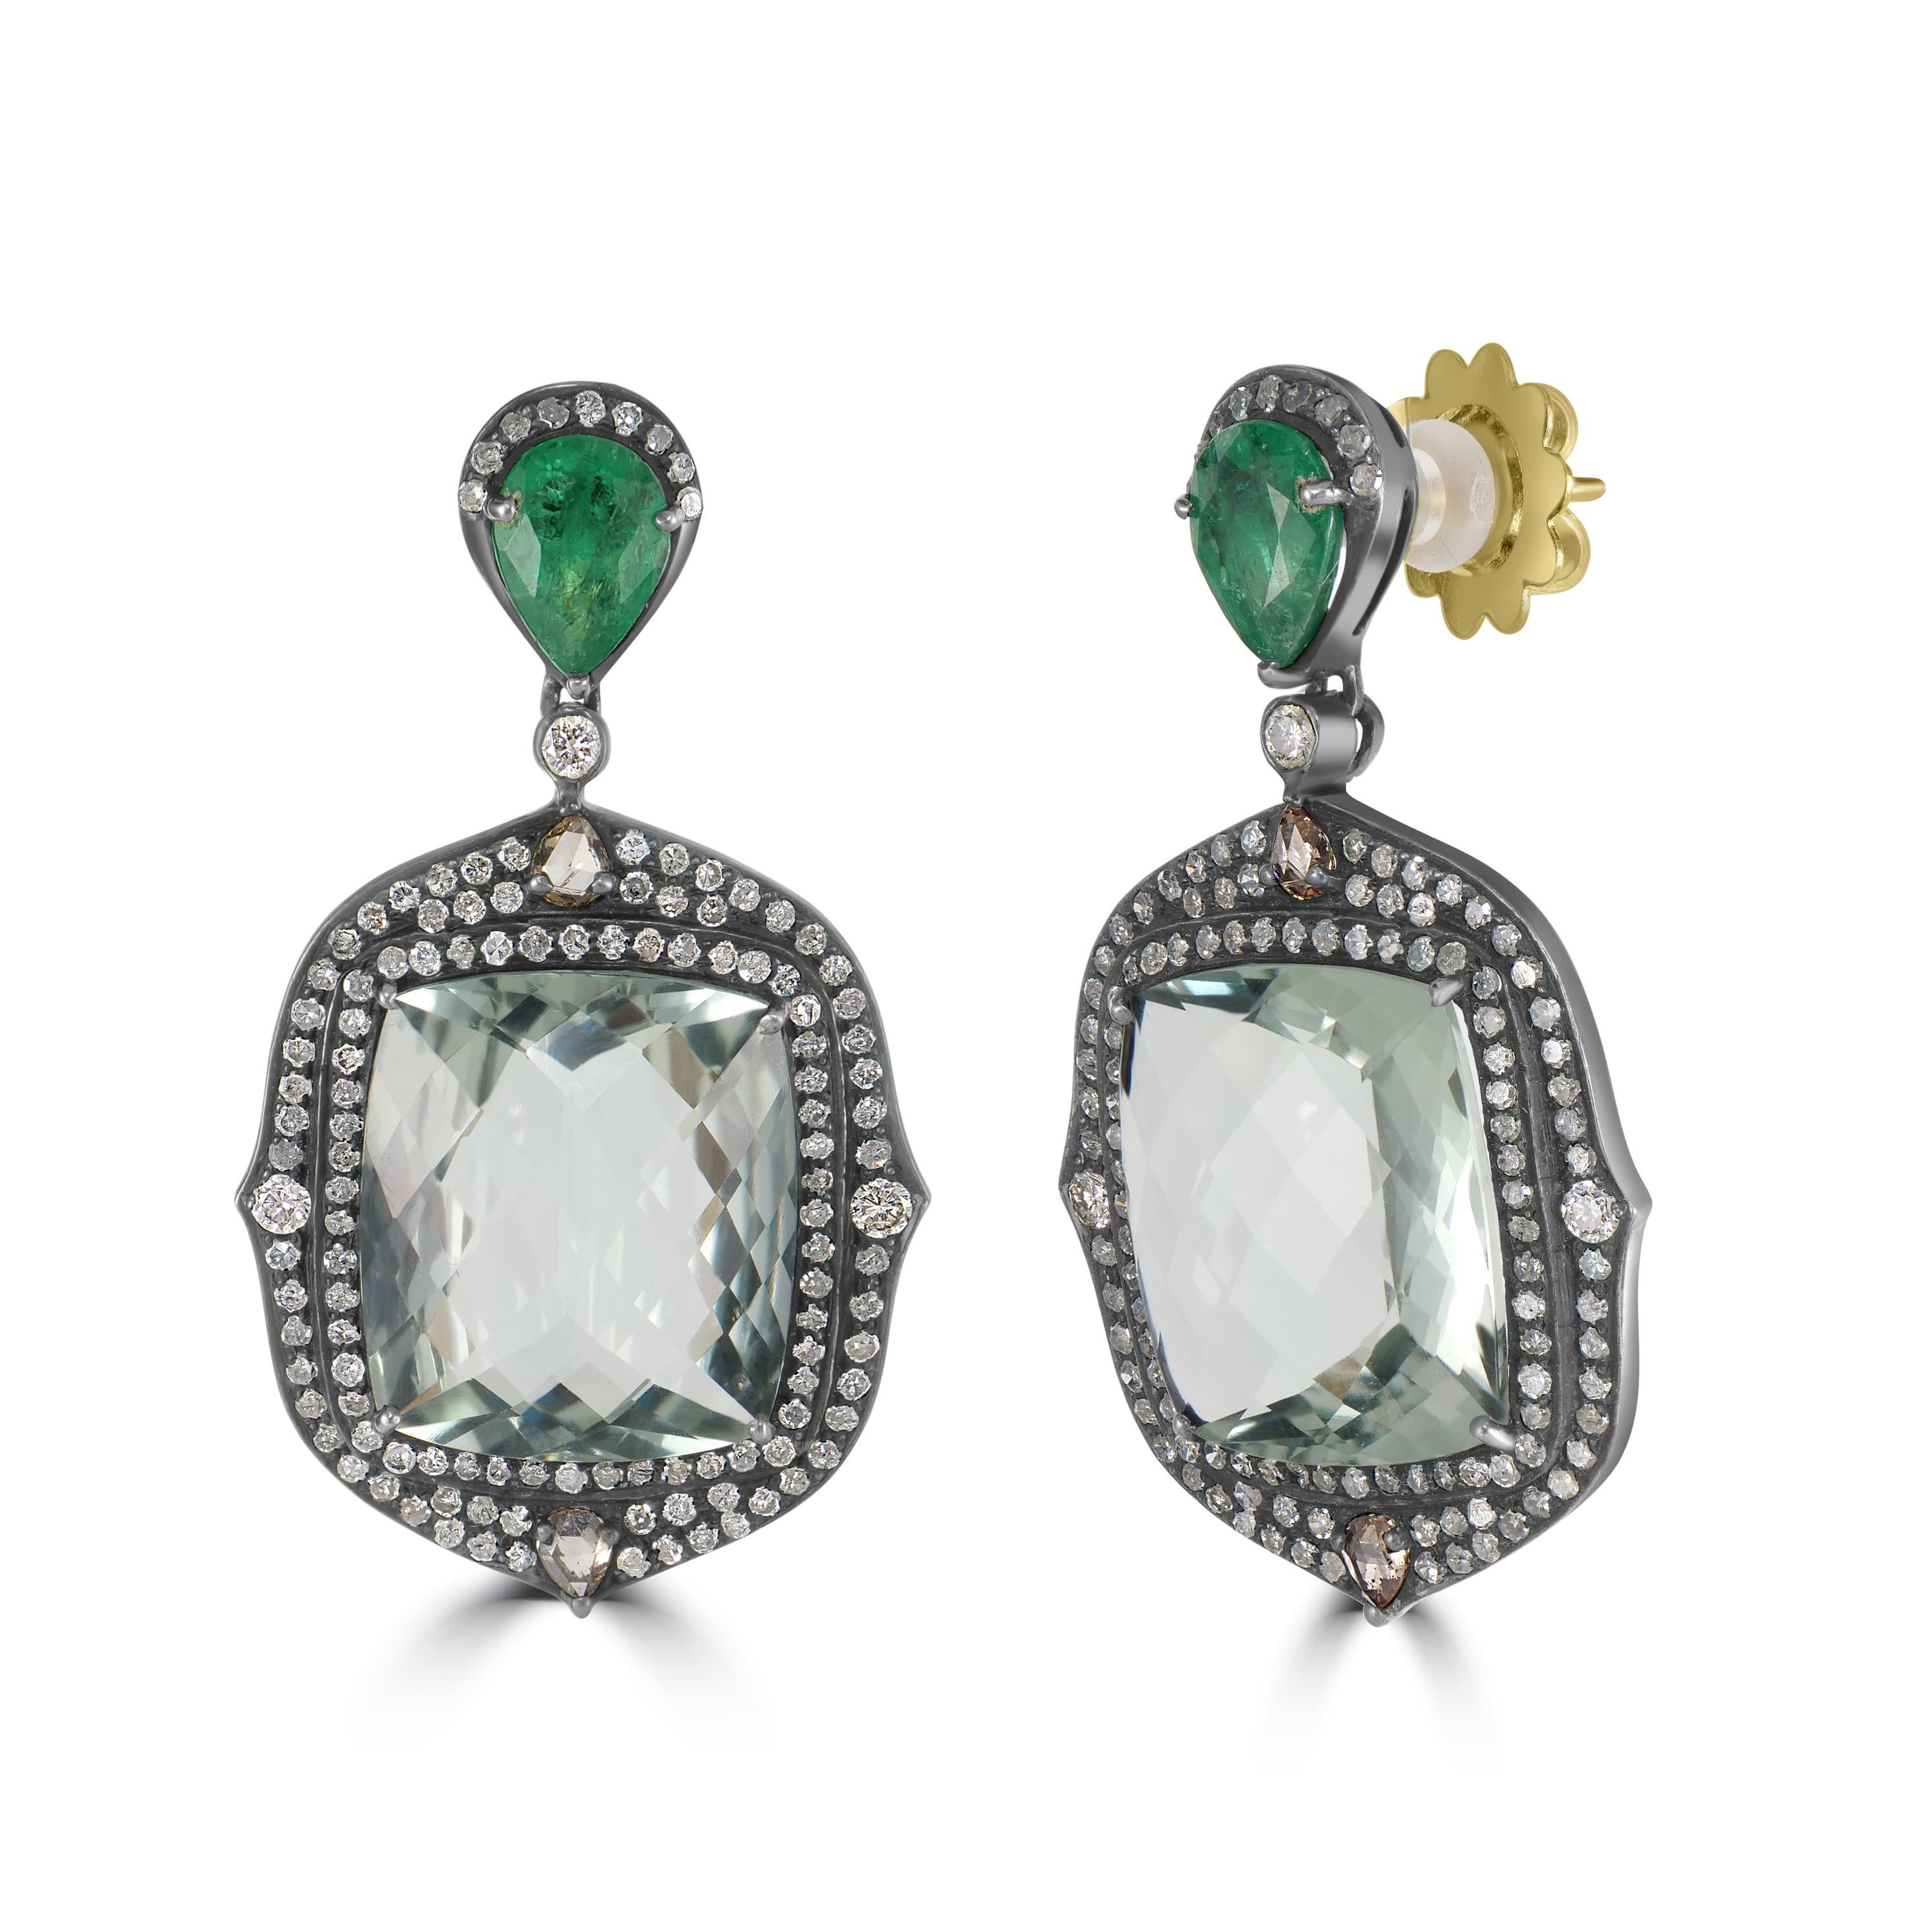 Introducing our stunning Victorian 25.6 Cttw. Green Amethyst, Diamond, and Emerald Dangle Earrings, a masterpiece of elegance and sophistication.

These exquisite dangle earrings feature a captivating frame drop design crafted from sterling silver